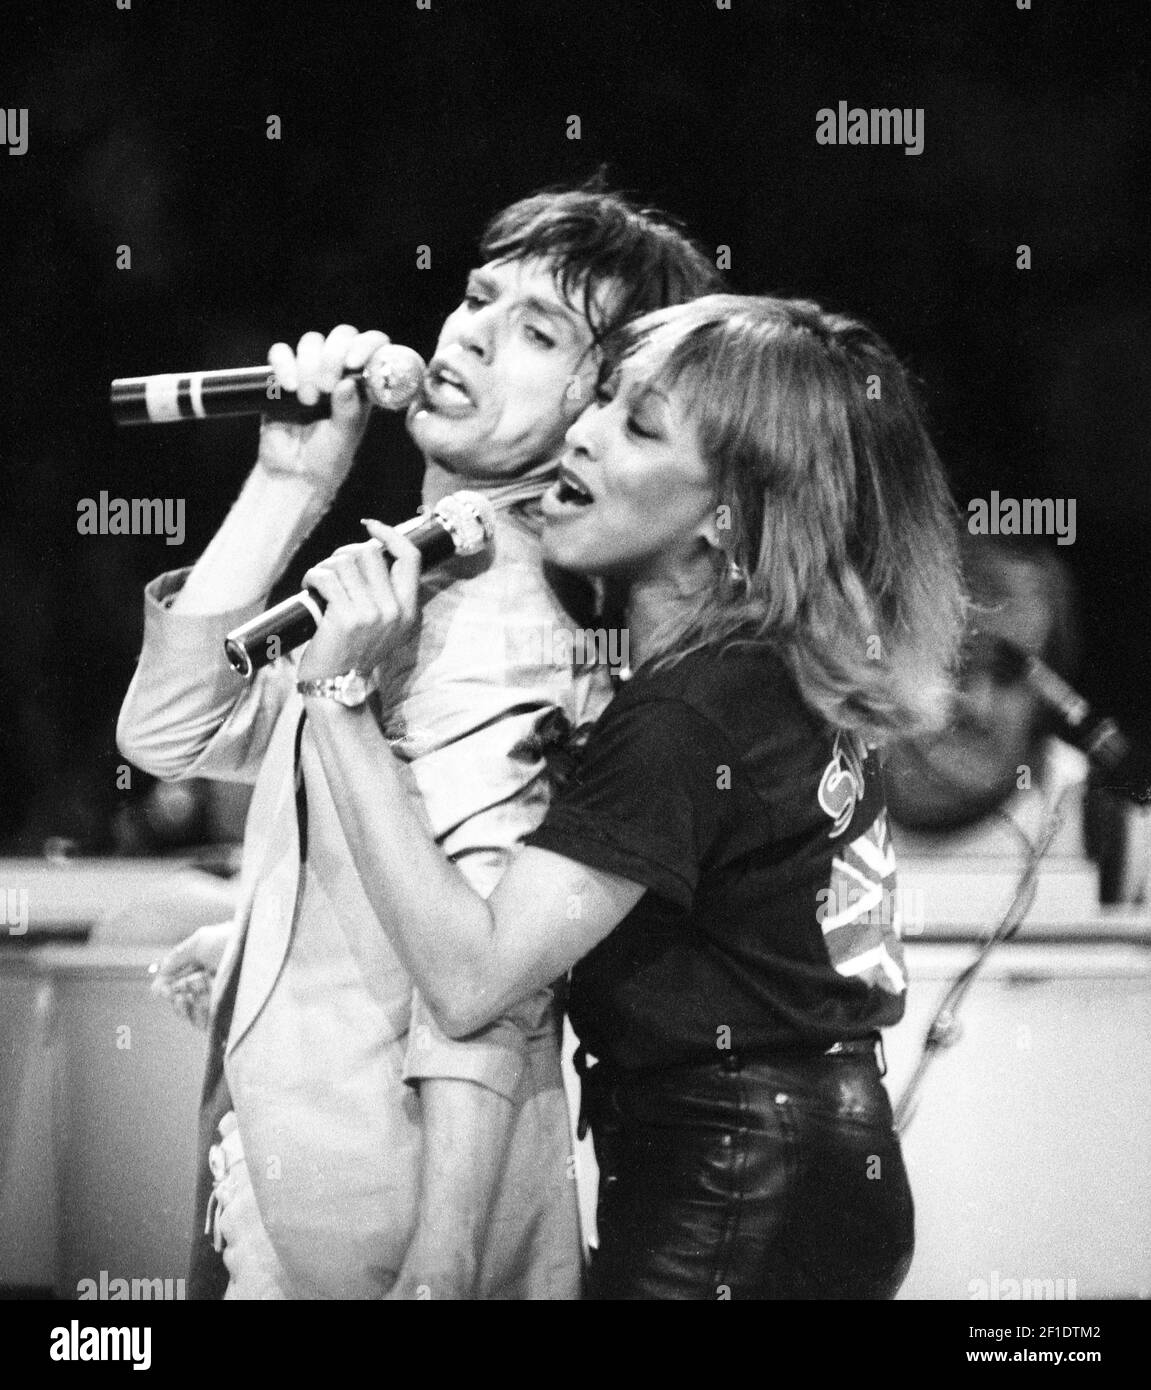 November 5, 1981; East Rutherford, NJ, USA; Singer Tina Turner sings a duet with Mick Jagger as part of the Rolling Stones concert at Giants Stadium in East Rutherford, N.J., on November 5, 1981. Mandatory Credit: Peter Karas/NorthJersey.com via USA TODAY NETWORK/Sipa USA Stock Photo